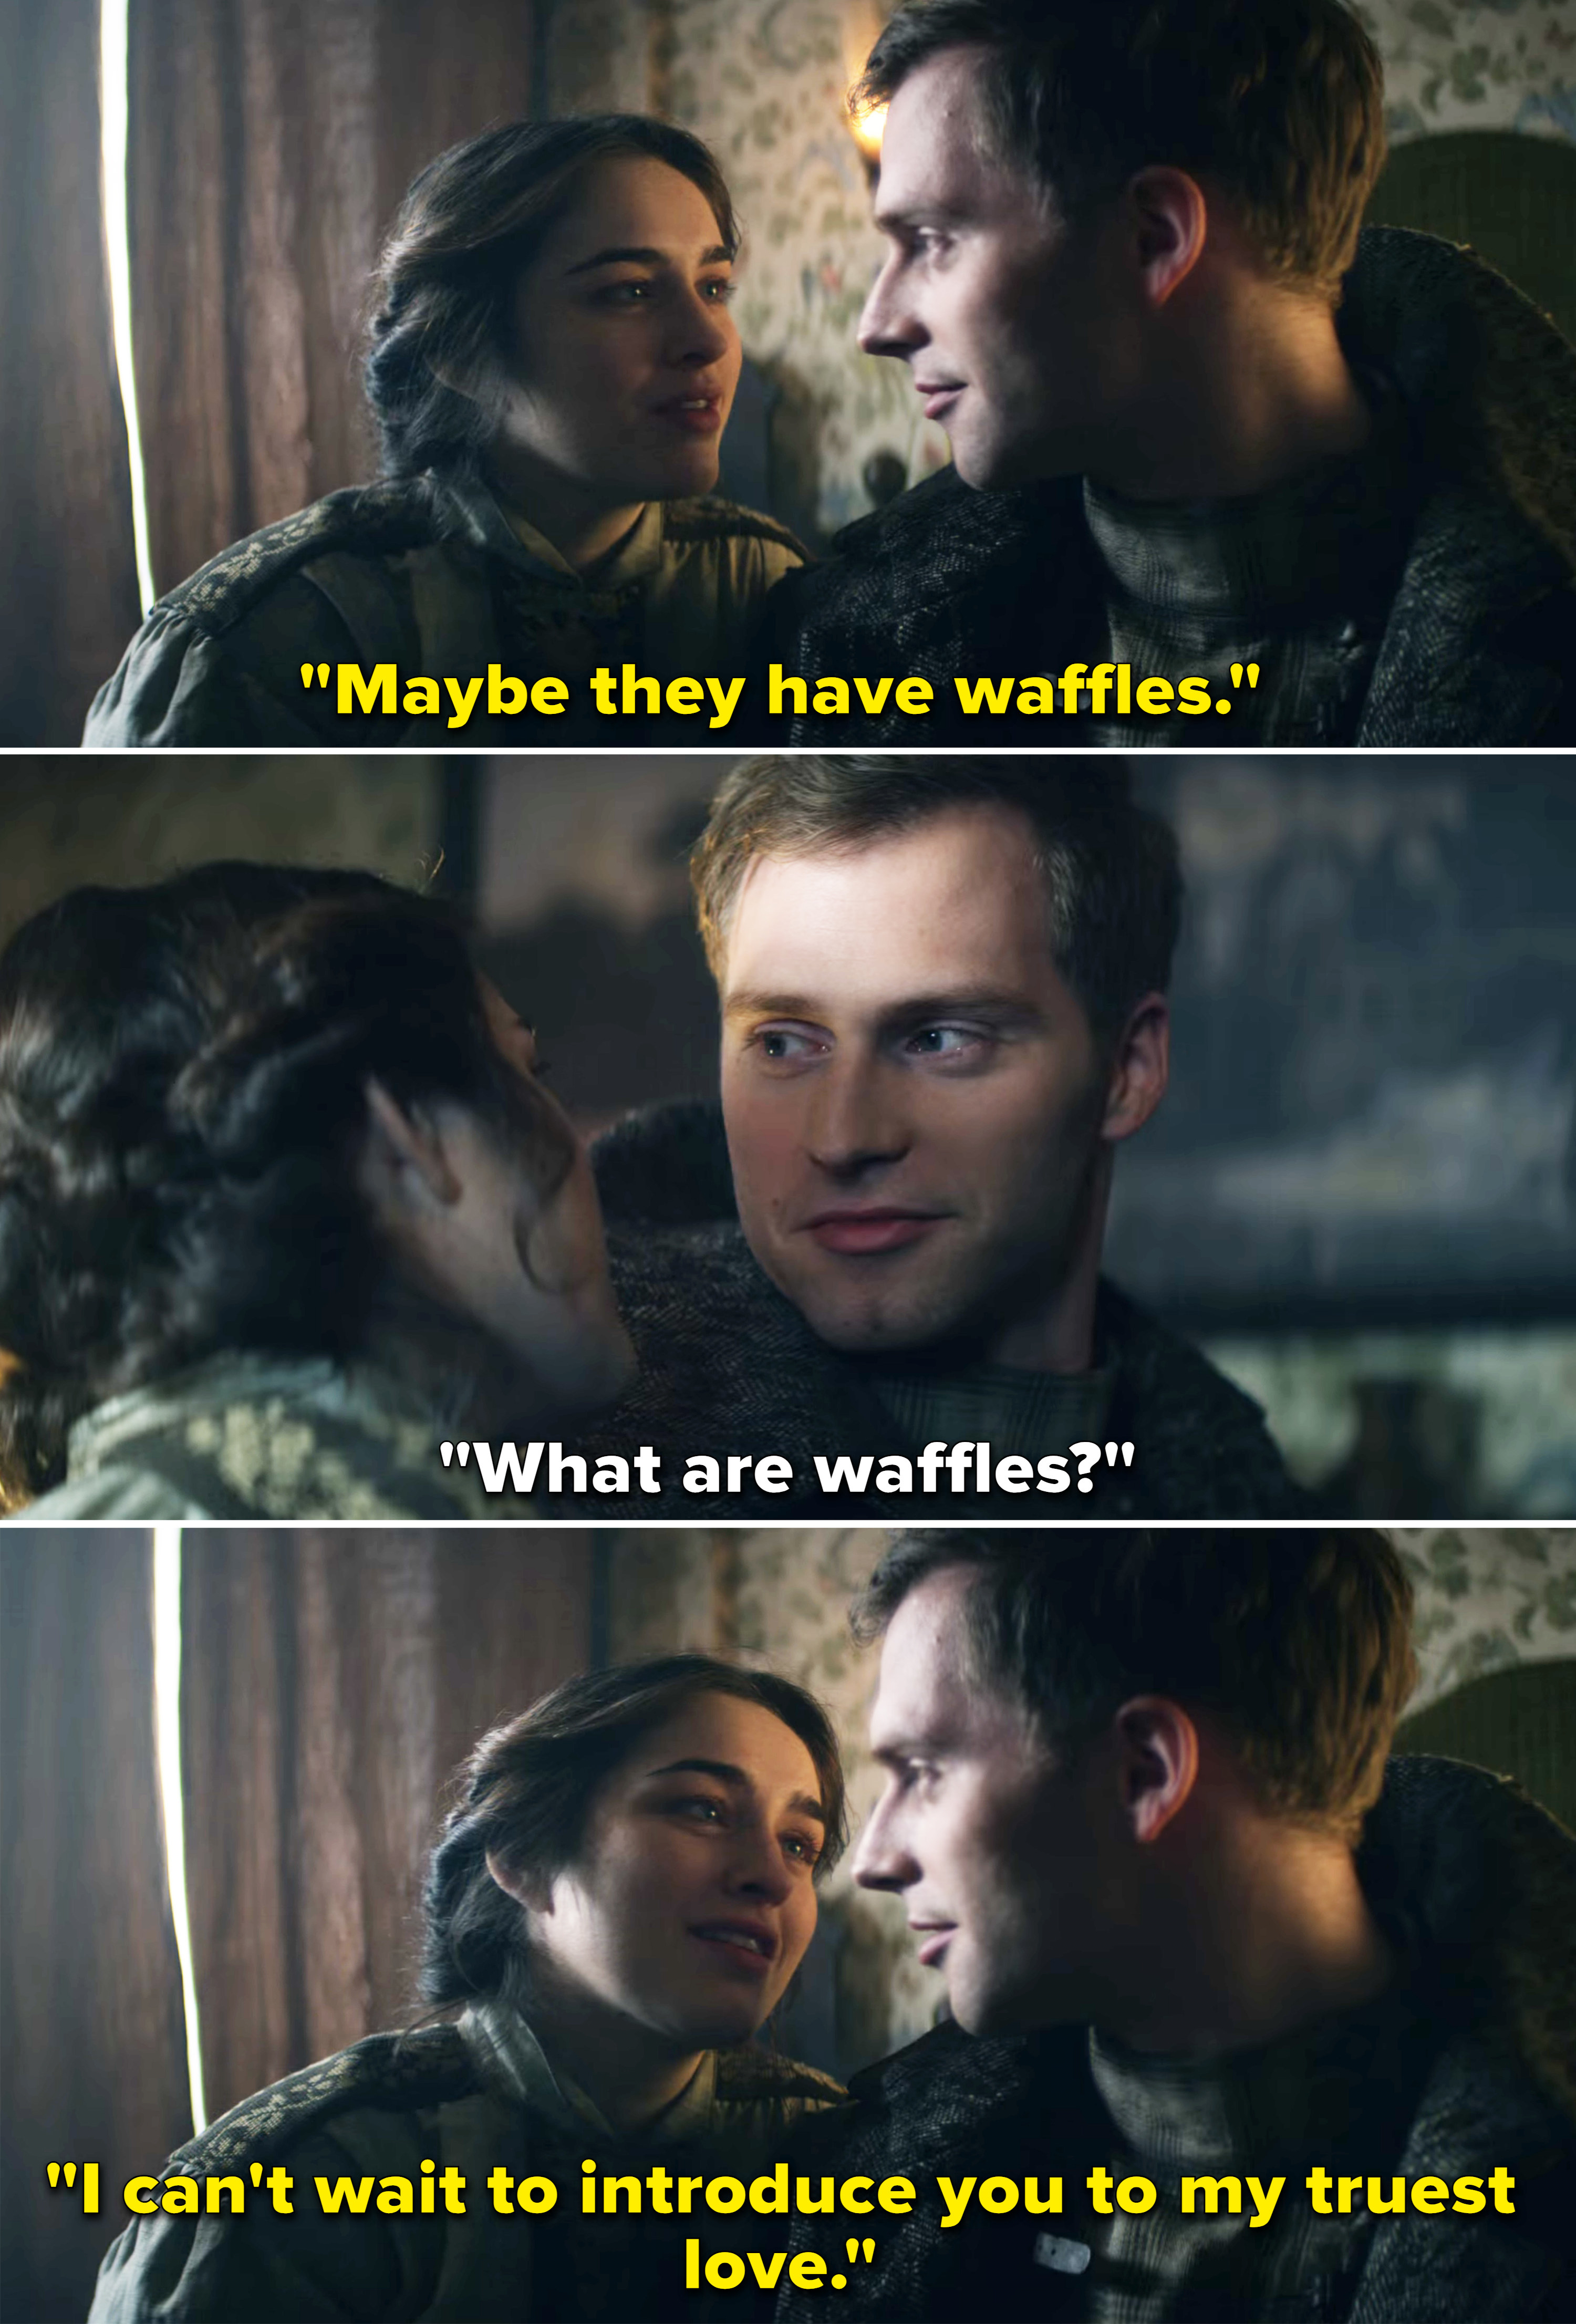 The two discussing waffles in a scene from the show